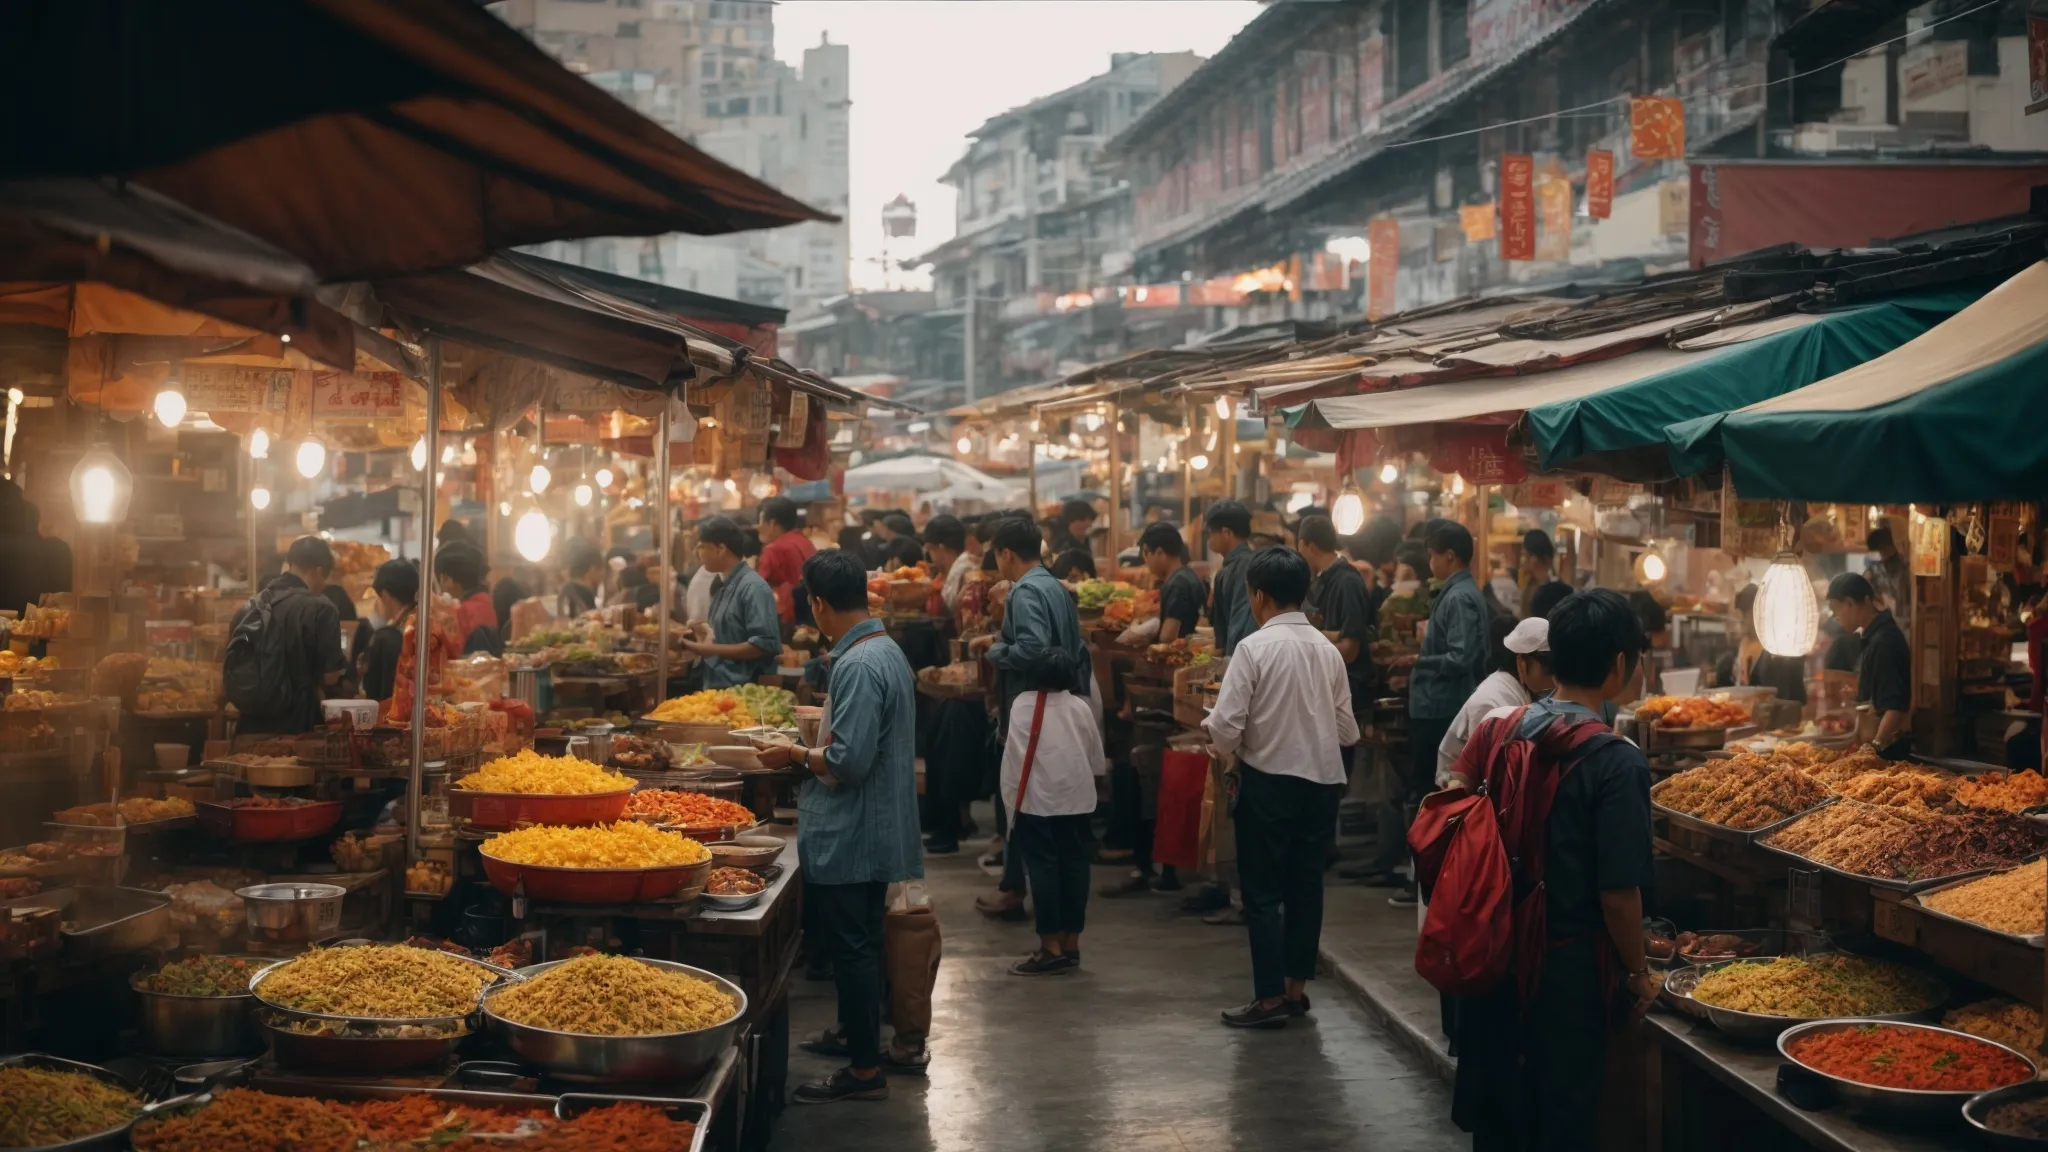 a bustling urban food market with diverse stalls offering an array of local cuisines.